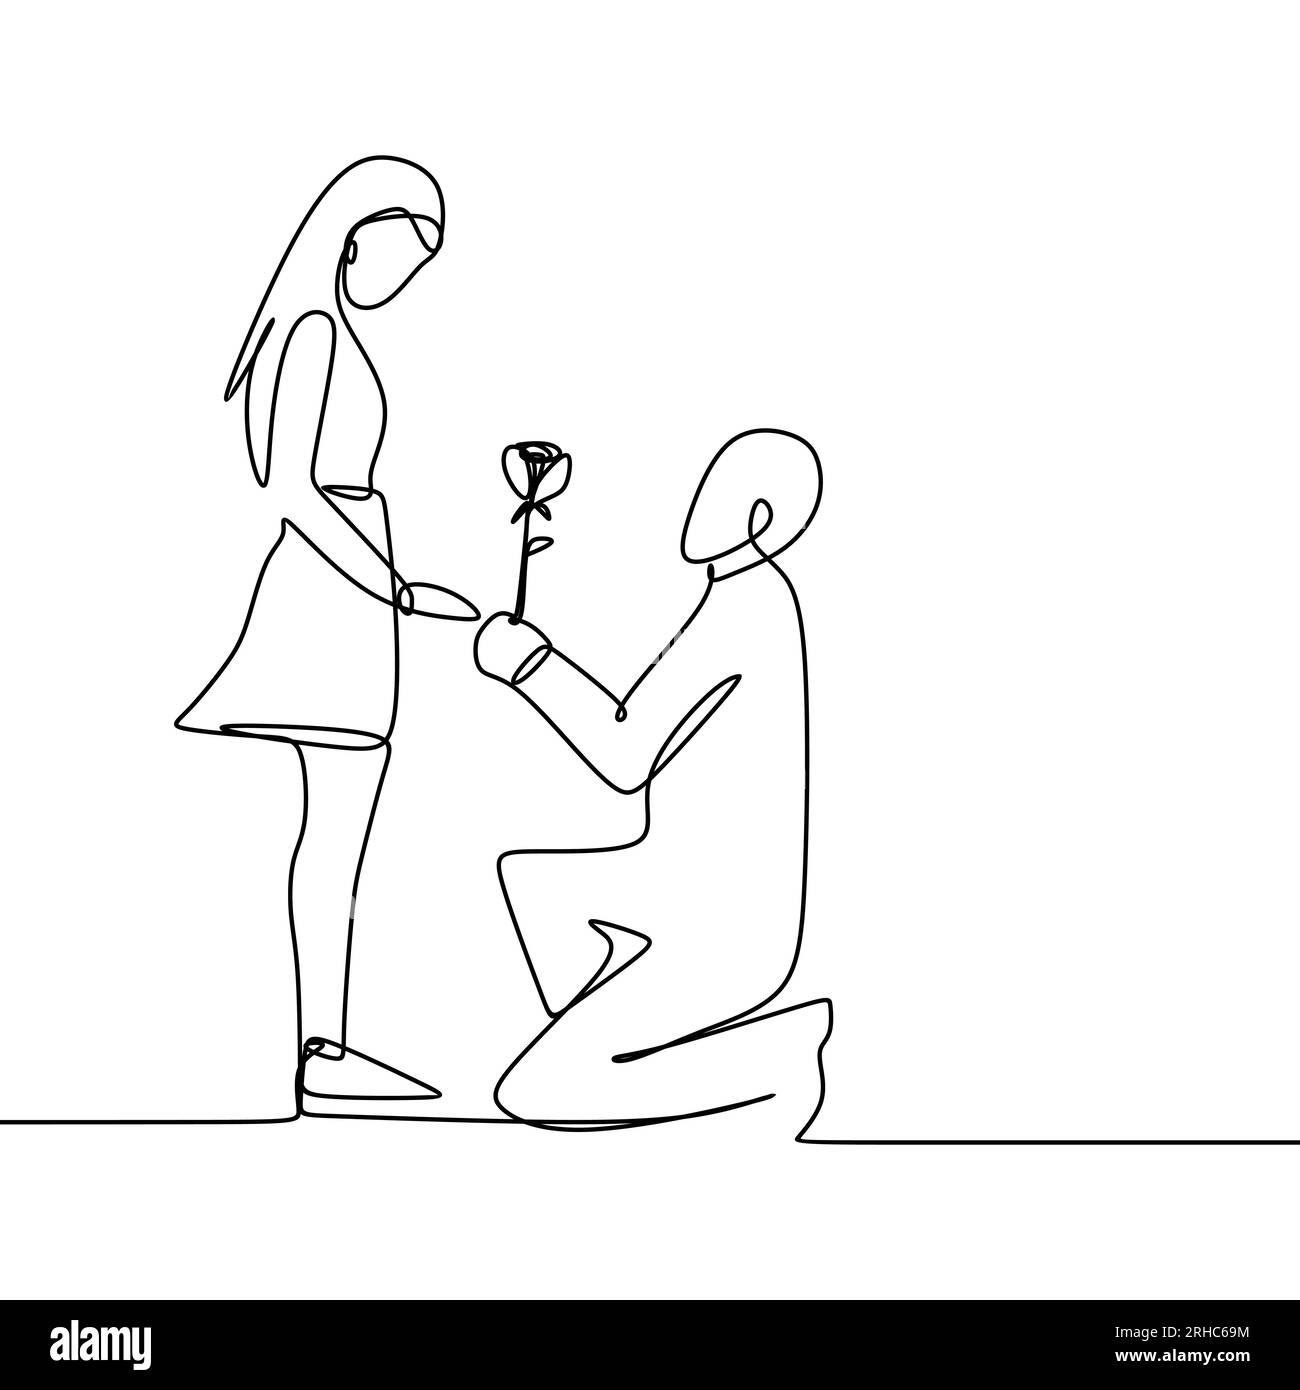 Romantic Propose Scenery Drawing  Cool Drawing Idea